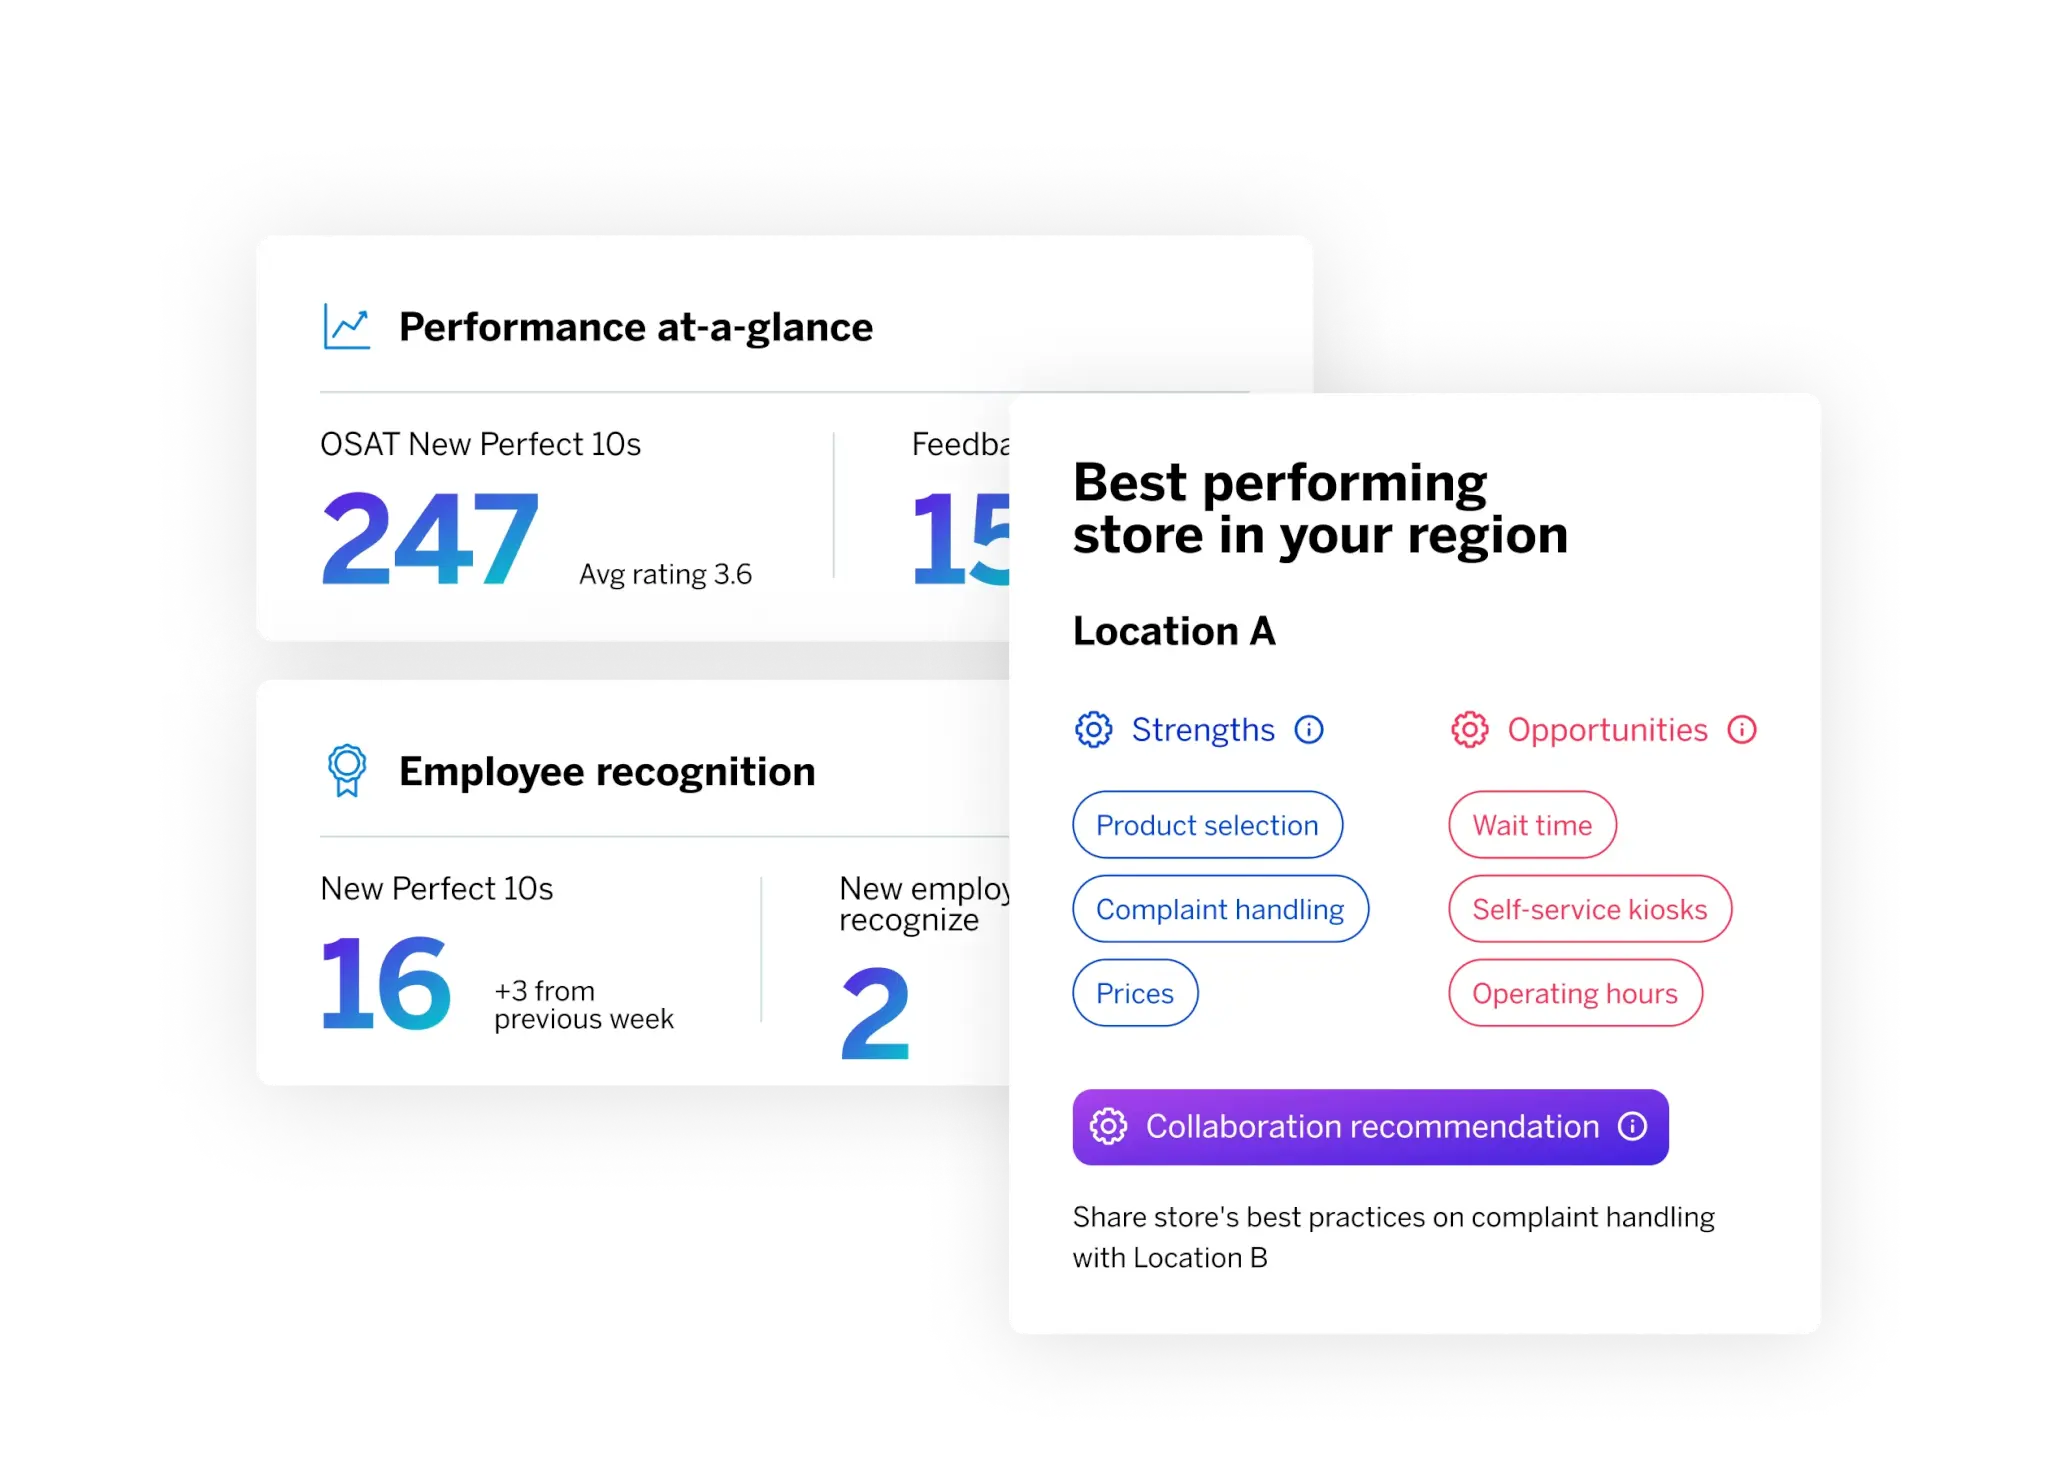 Layered dashboards showing retail performance at a glance. Strengths and Opportunities of Location A are highlighted and there is a main recommendation to share the best practices with Location B.